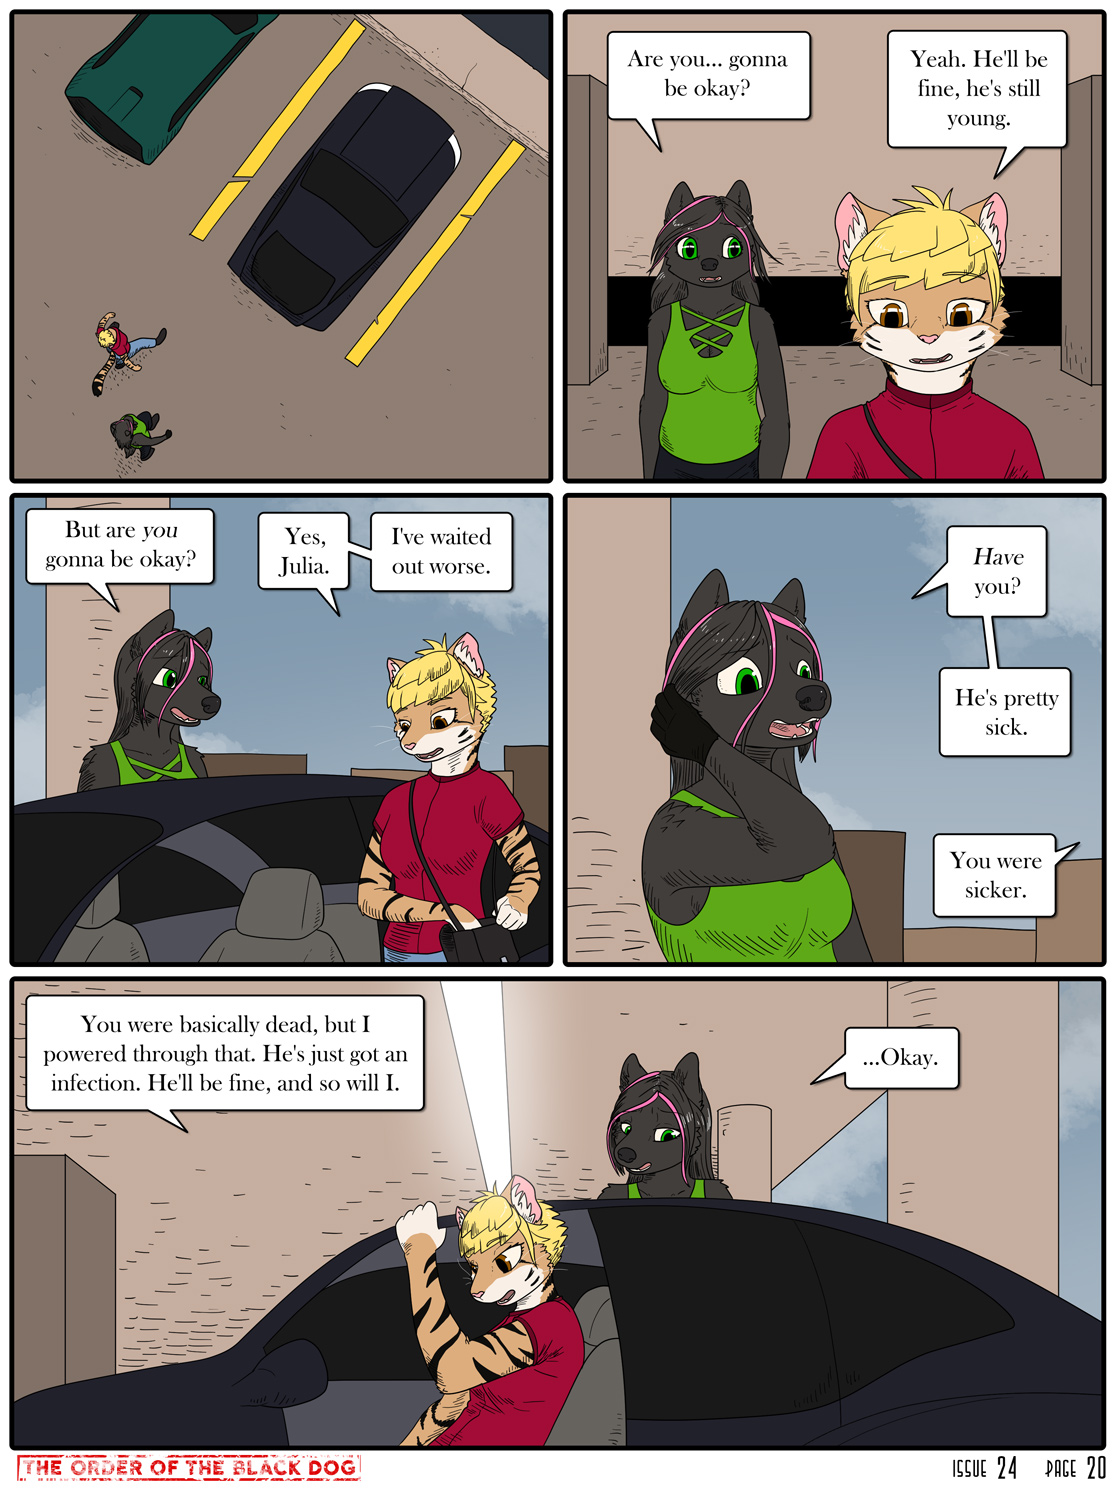 Issue 24, Page 20